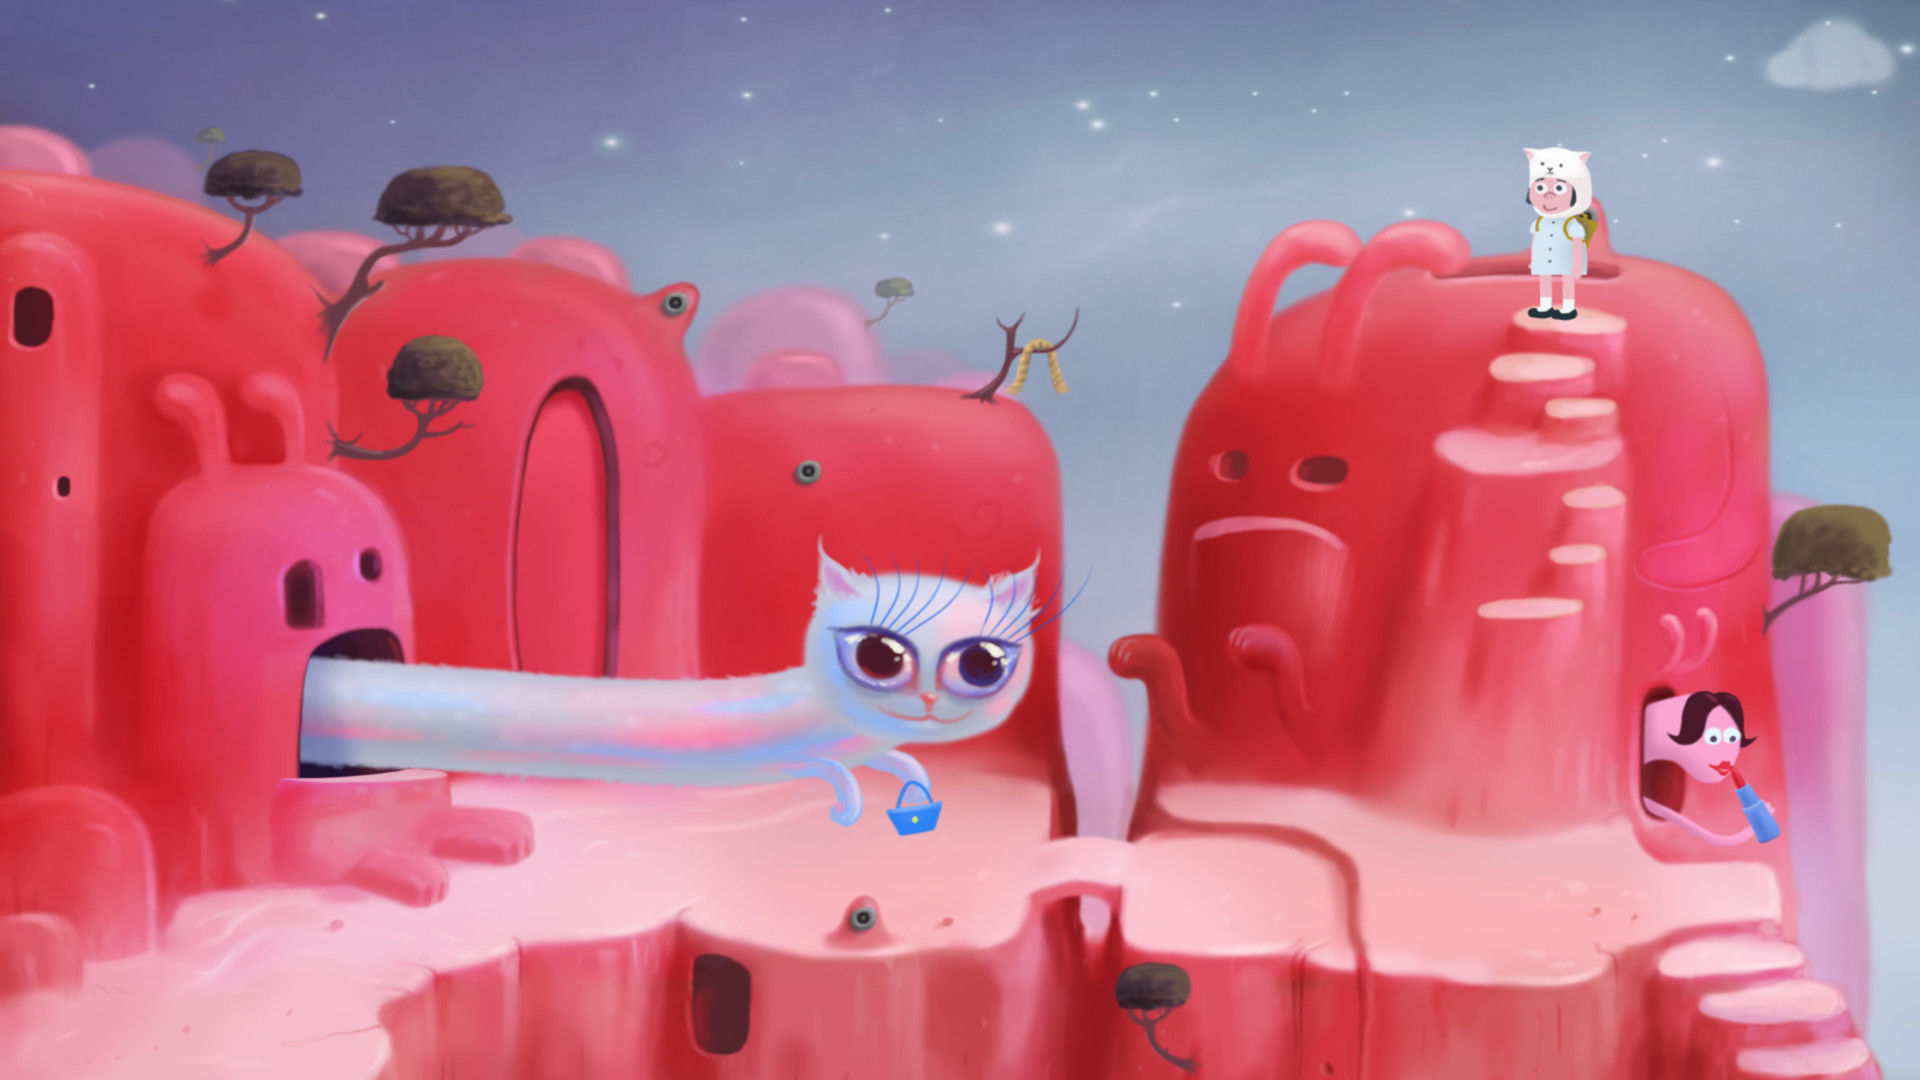 Catie in MeowmeowLand Free Download